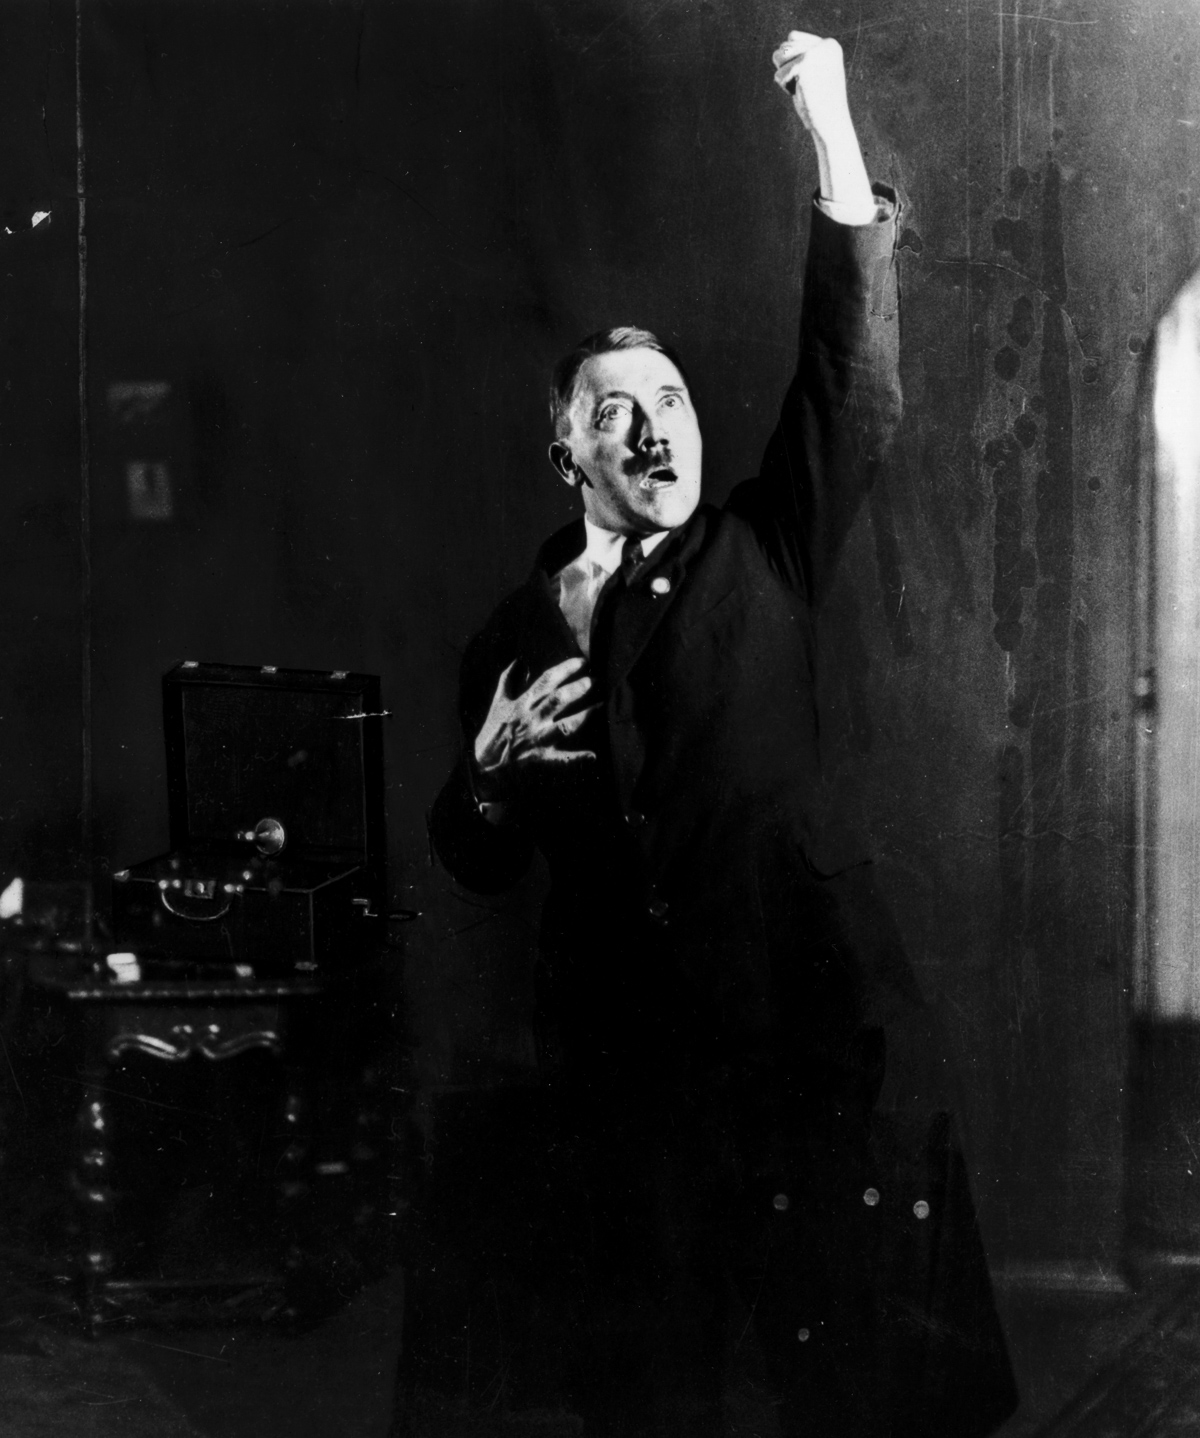 Adolf Hitler (1889 - 1945), leader of the National Socialist German Workers' Party (NSDAP), strikes a pose for photographer Heinrich Hoffmann whilst listening to a recording of his own speeches. After seeing the photographs, Hitler ordered Hoffmann to destroy the negatives, but he disobeyed. (Photo by Heinrich Hoffmann/Getty Images)